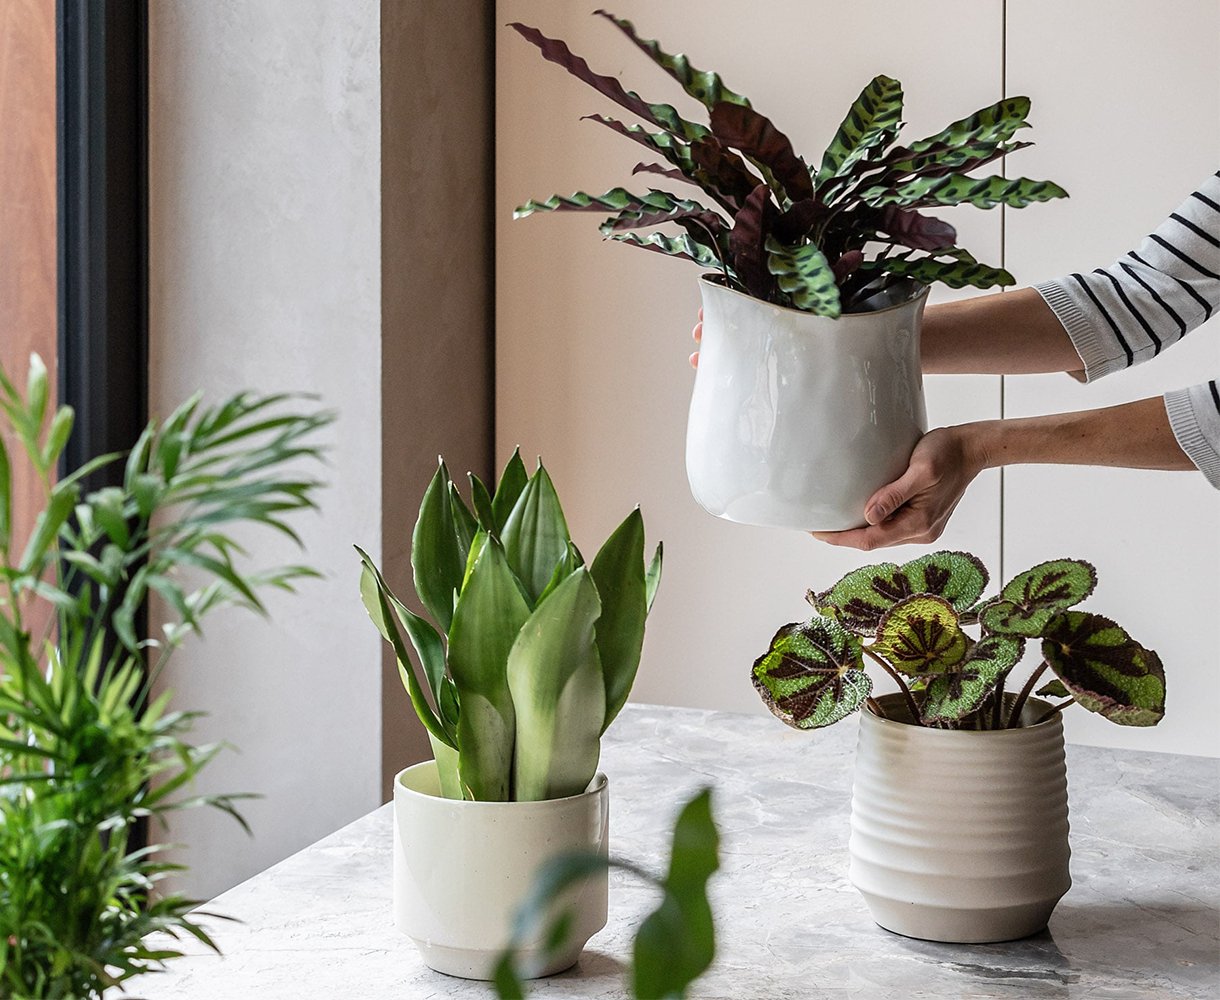 Top 5 best gifts for plant lovers - Leaf Envy